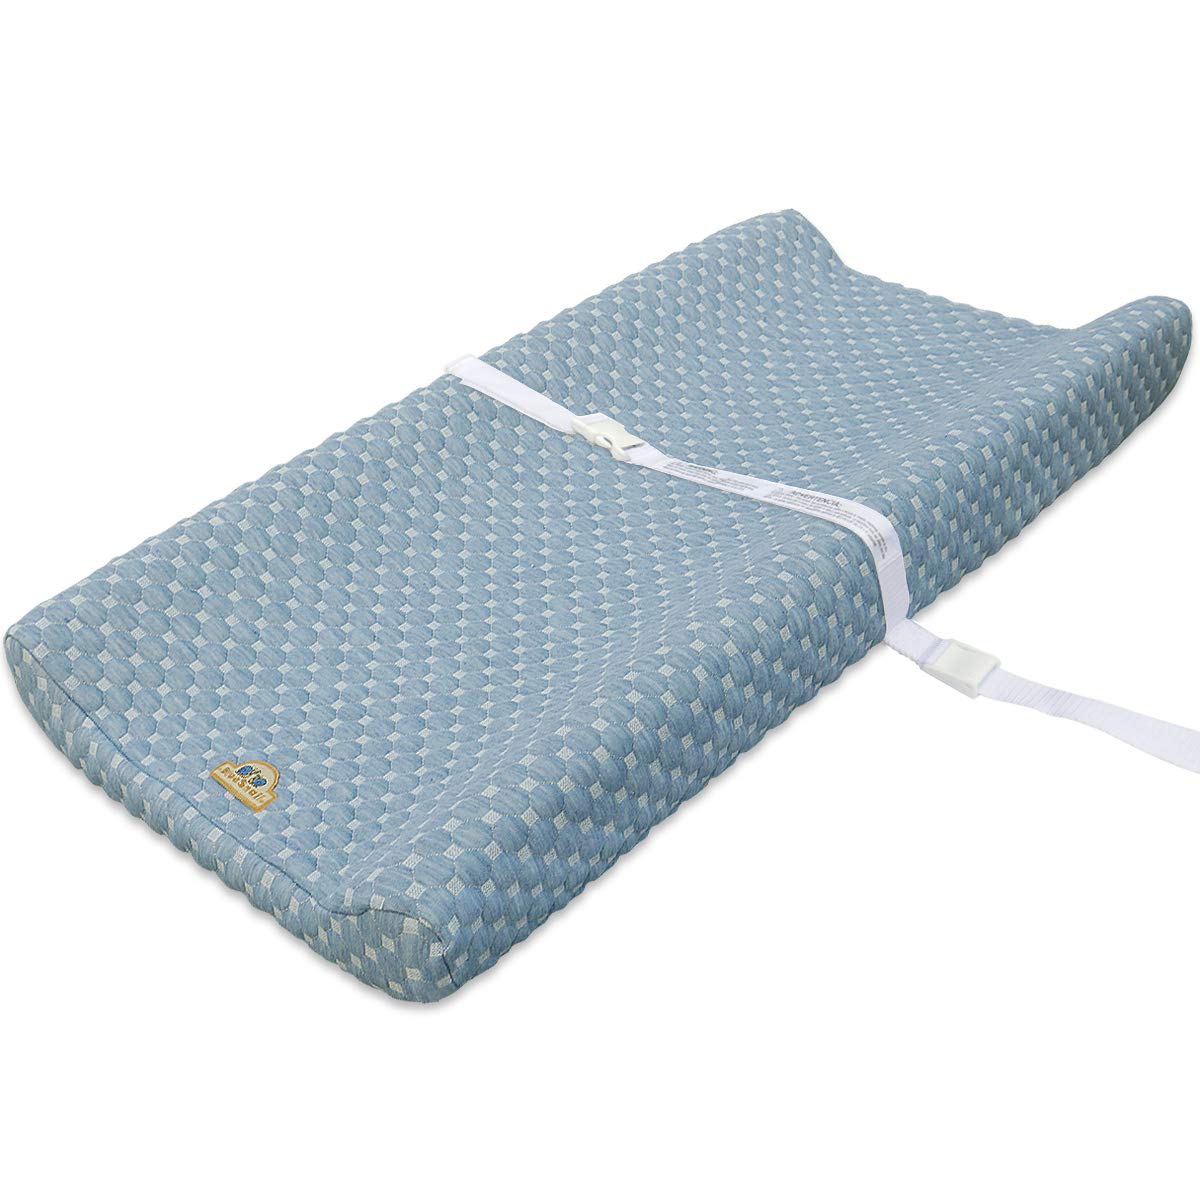 Book Cover Super Soft and Comfy Bamboo Changing Pad Cover for Baby by BlueSnail (Blue) Blue 16x32 Inch (Pack of 1)